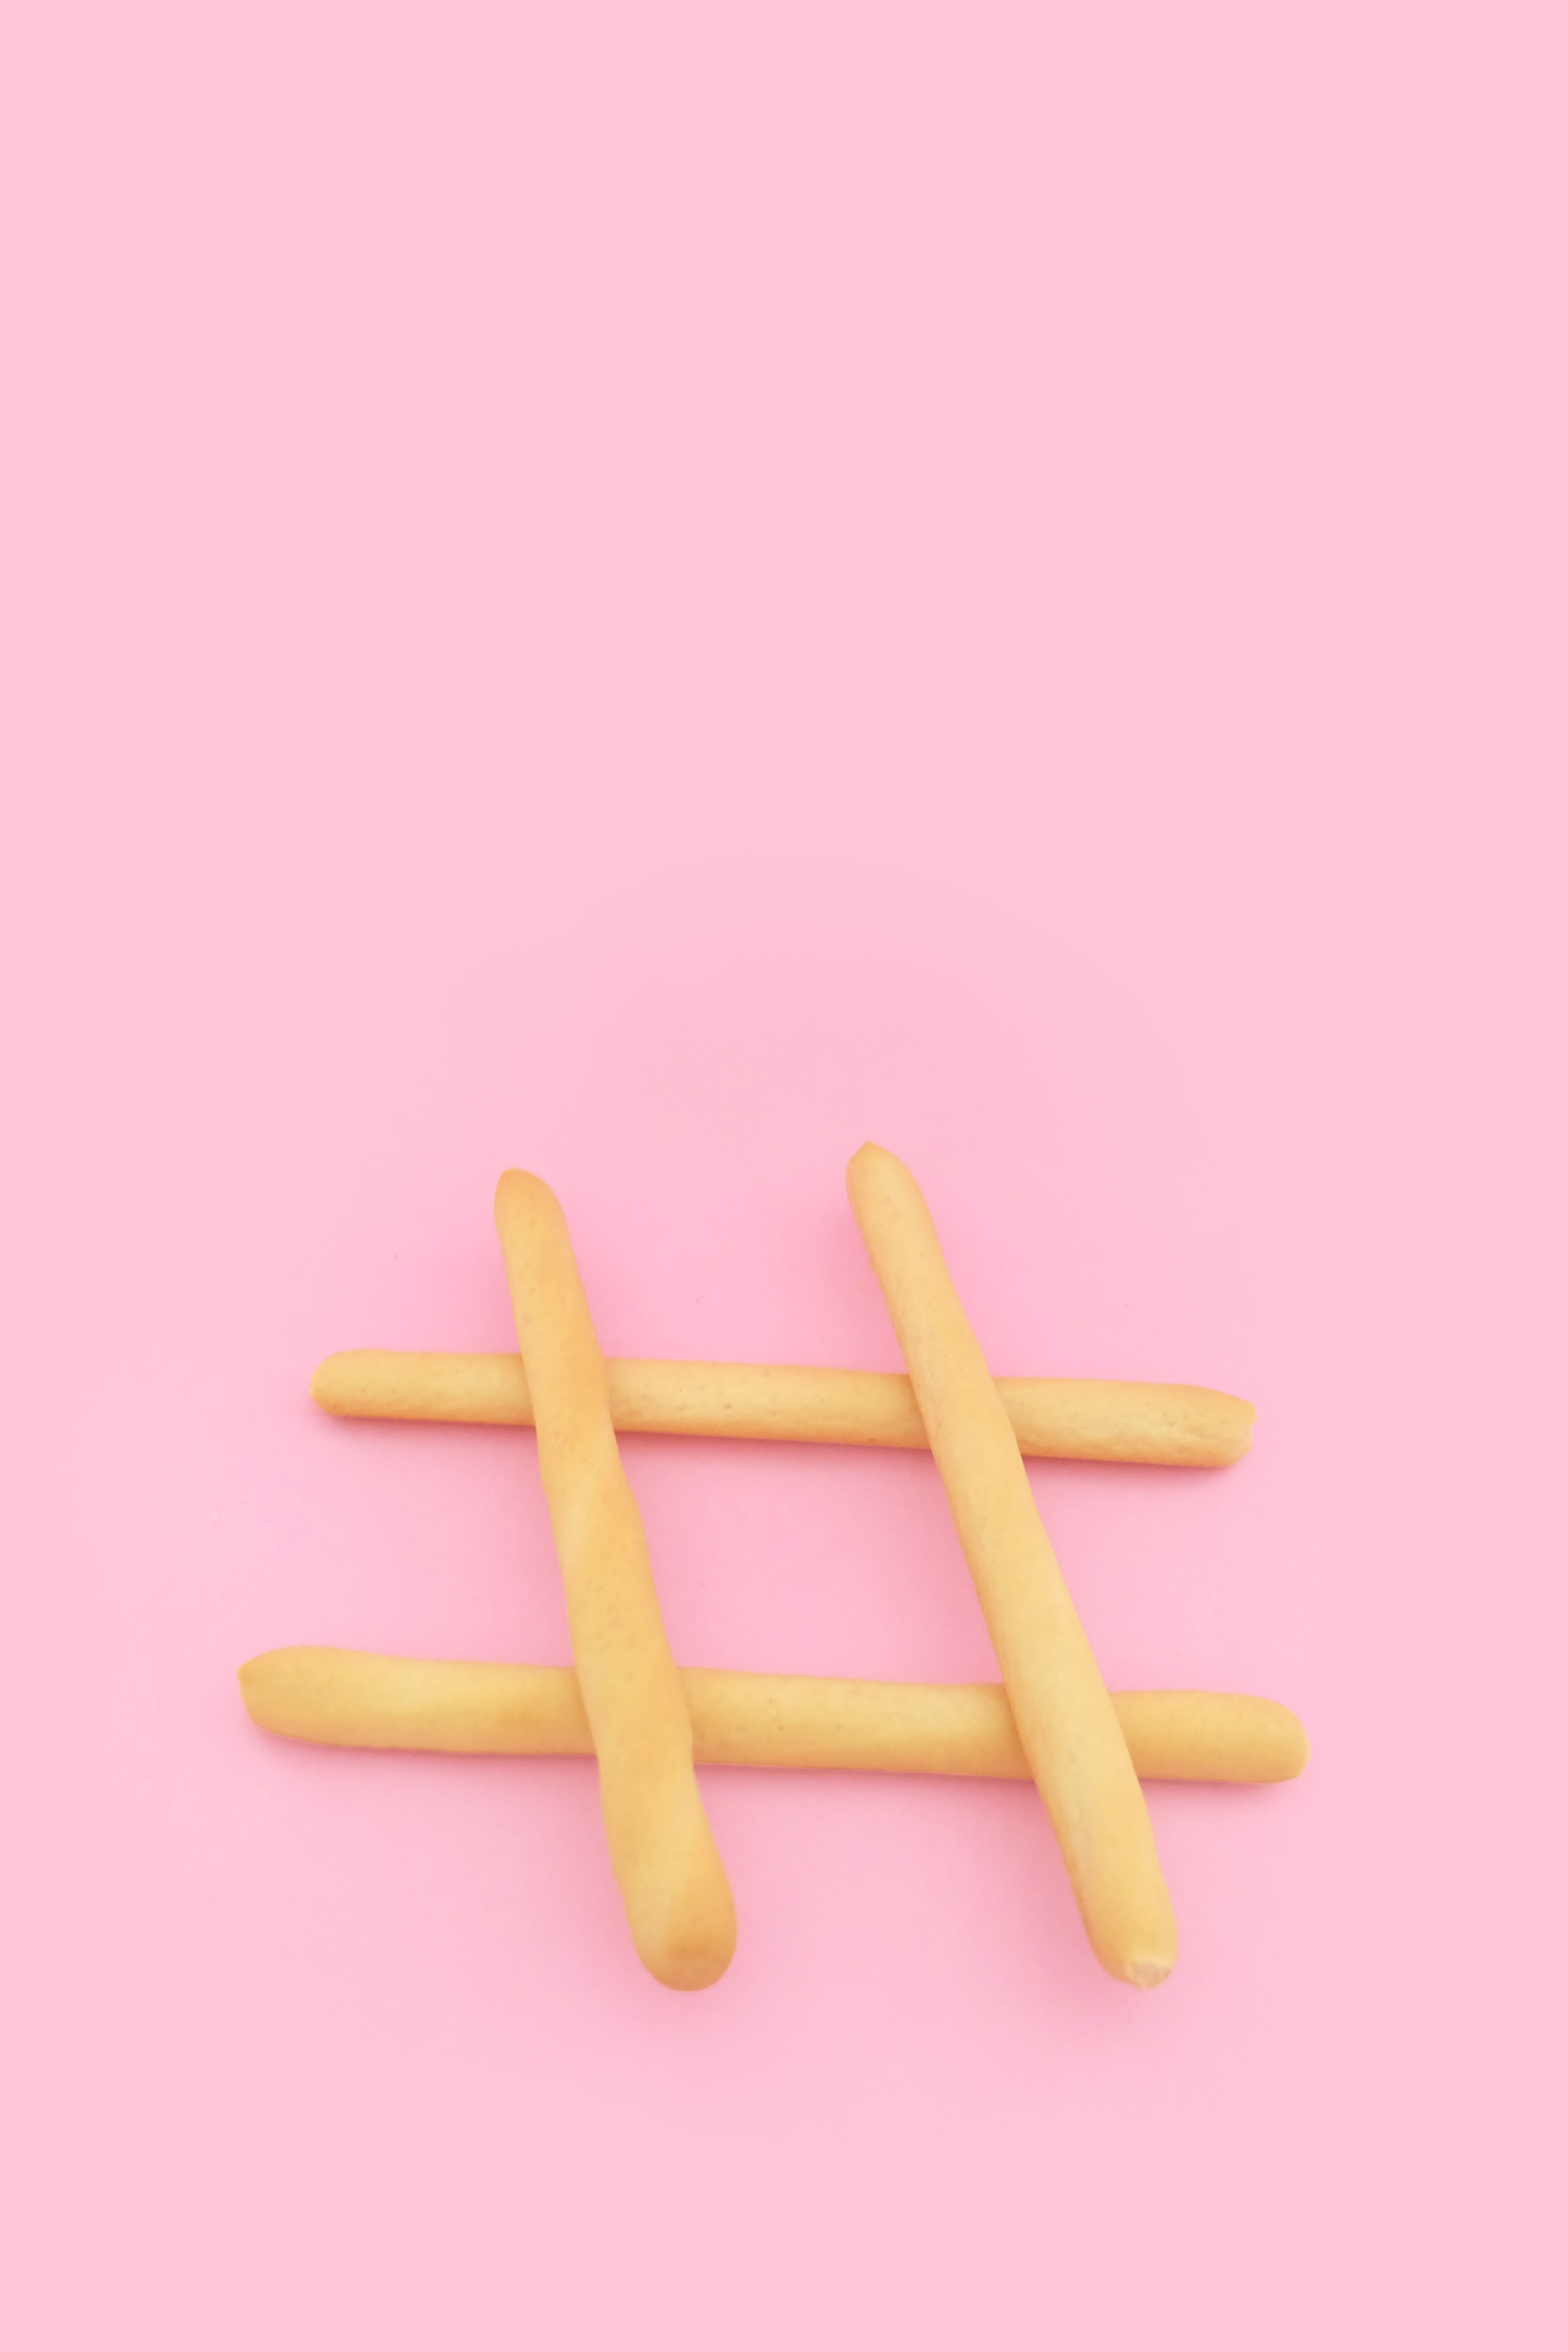 french-fries-used-as-hashtag-symbol-on-pink-background